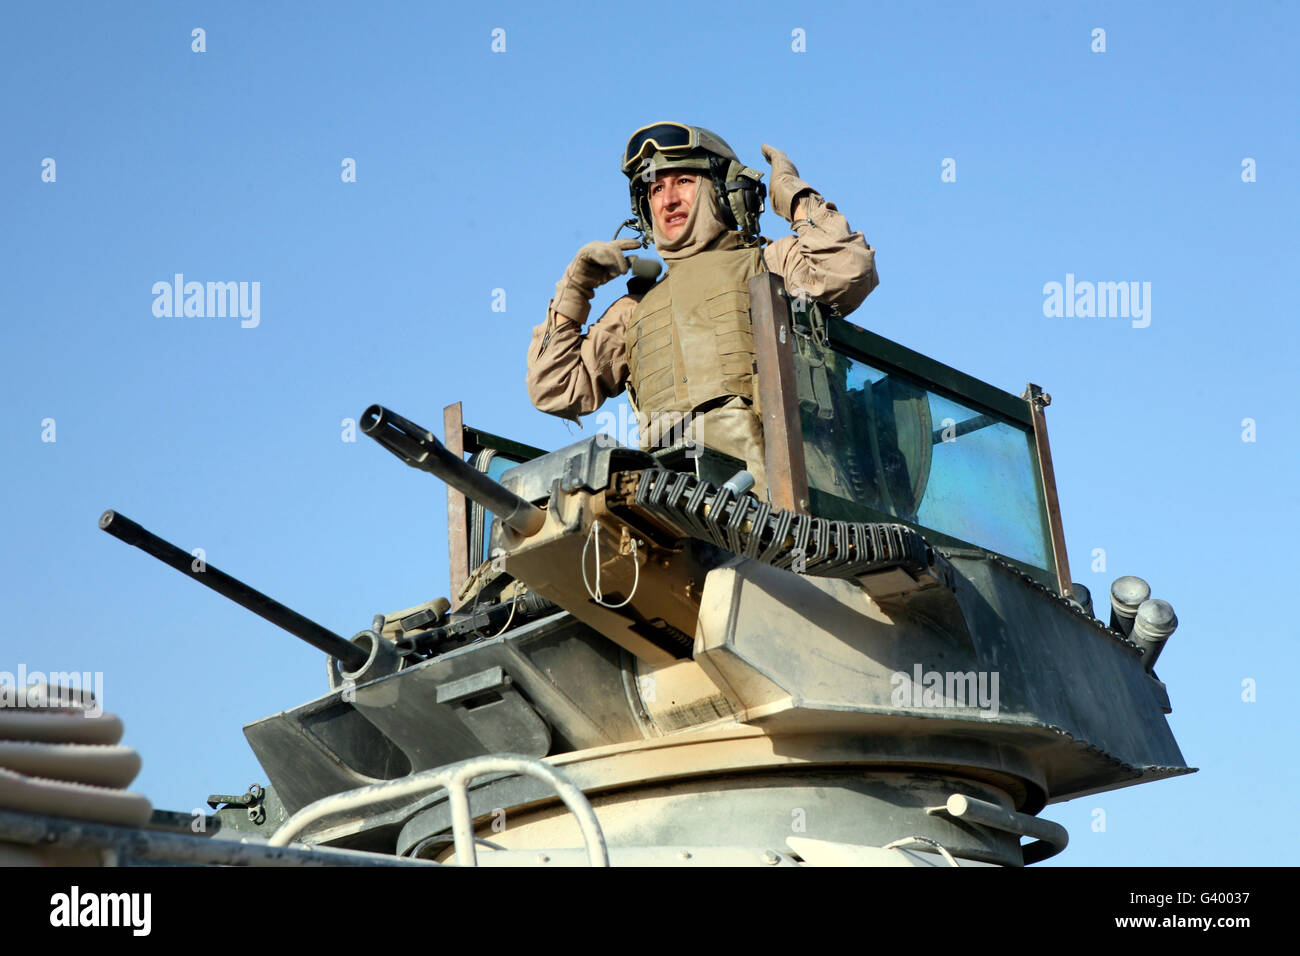 A U.S. Marine scanning the surrounding area from the turret of an amphibious assault vehicle in Saqlawiyah, Iraq. Stock Photo